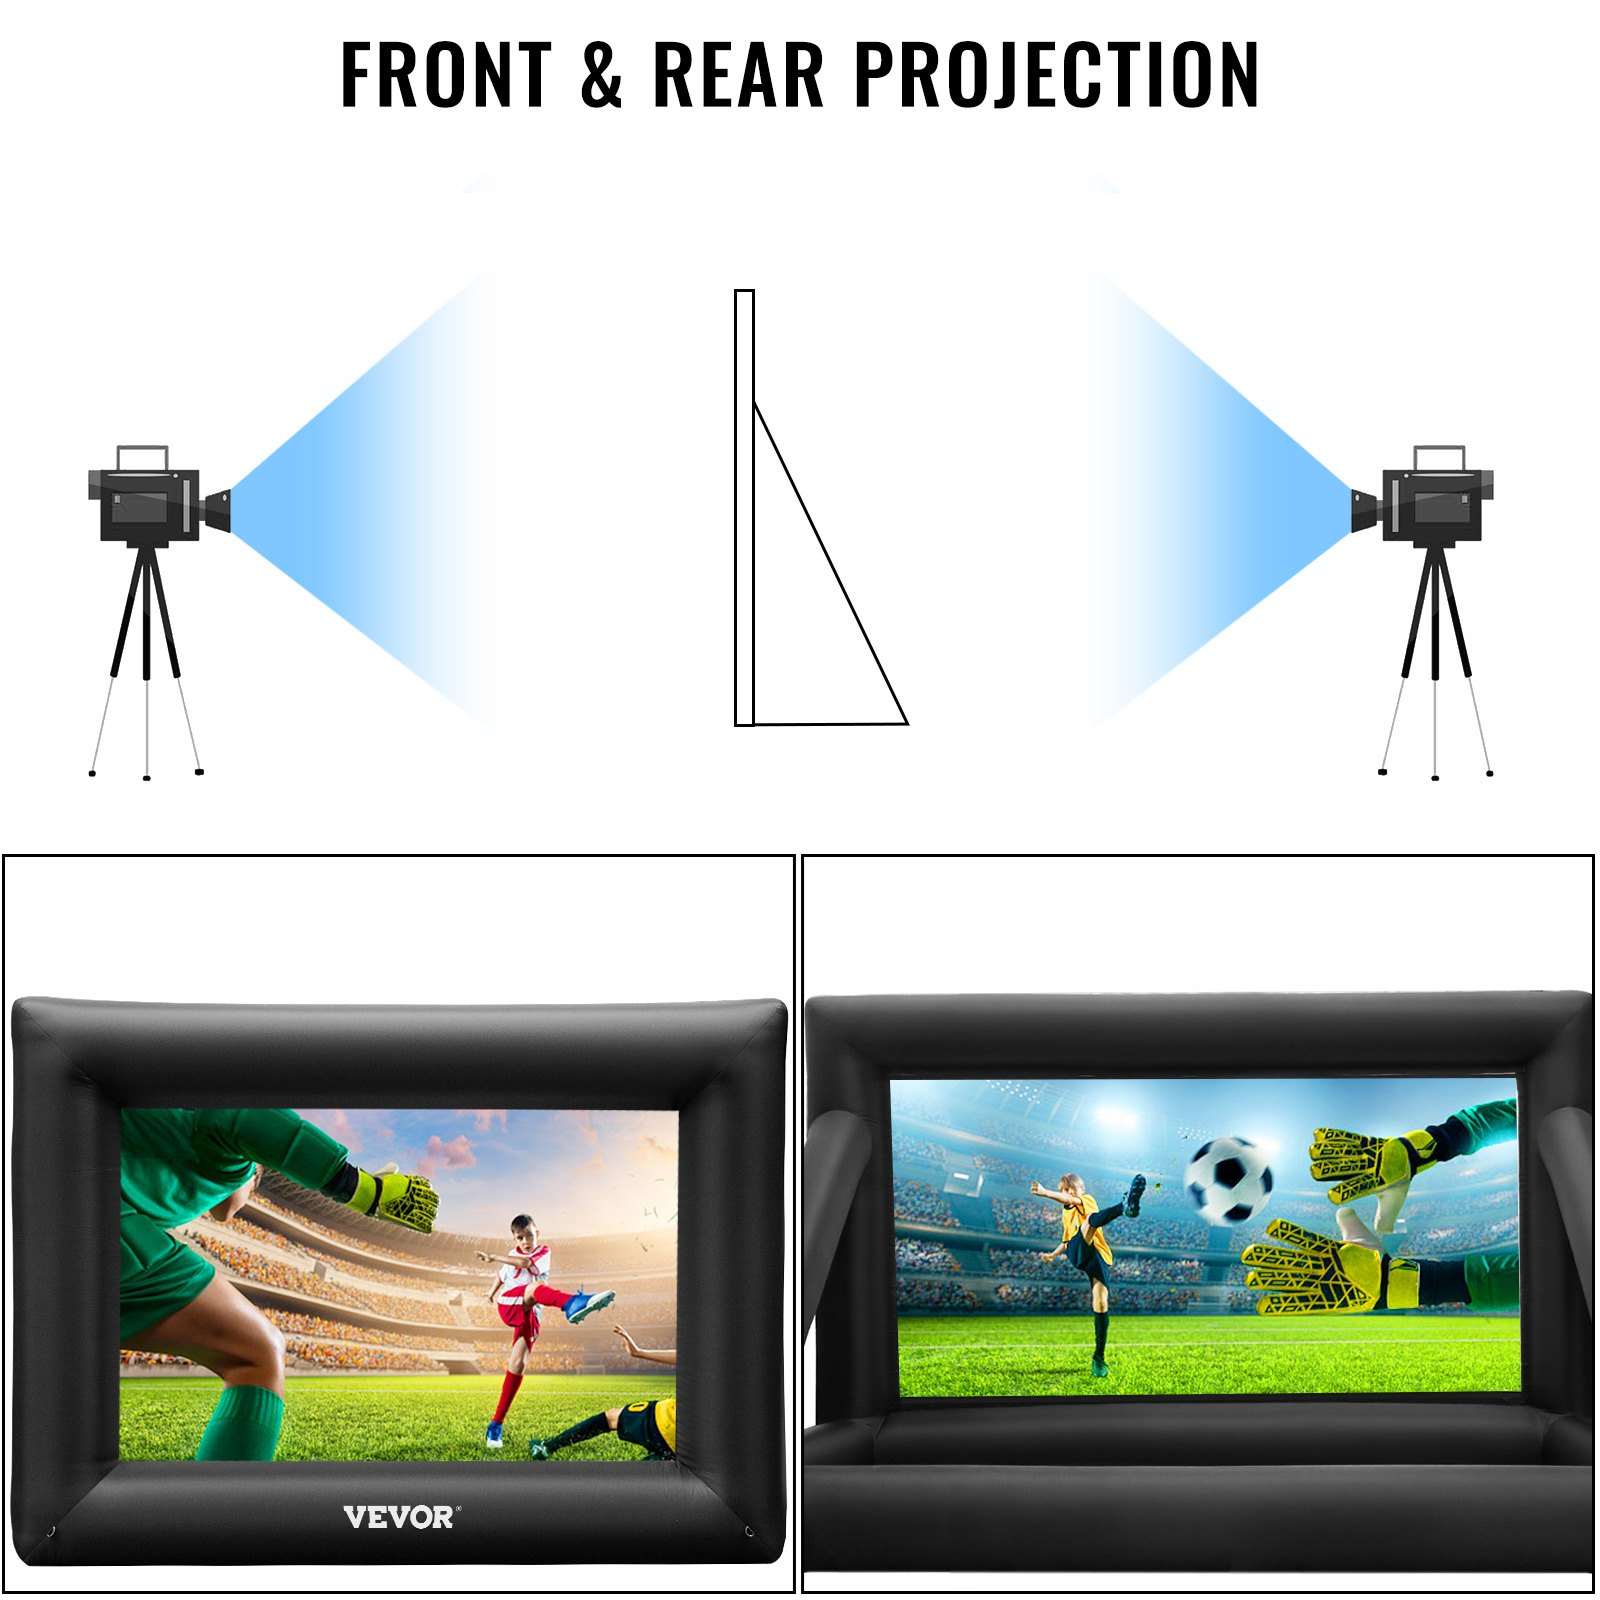 VEVOR Inflatable Movie Screen 24FT（288inch） Inflatable Projector Screen for outside with 360W Air Blower Inflatable Screen Oxford Fabric Material Blow Up Screen for Outdoor Movie Supports Front/Rear Projection, Goodies N Stuff